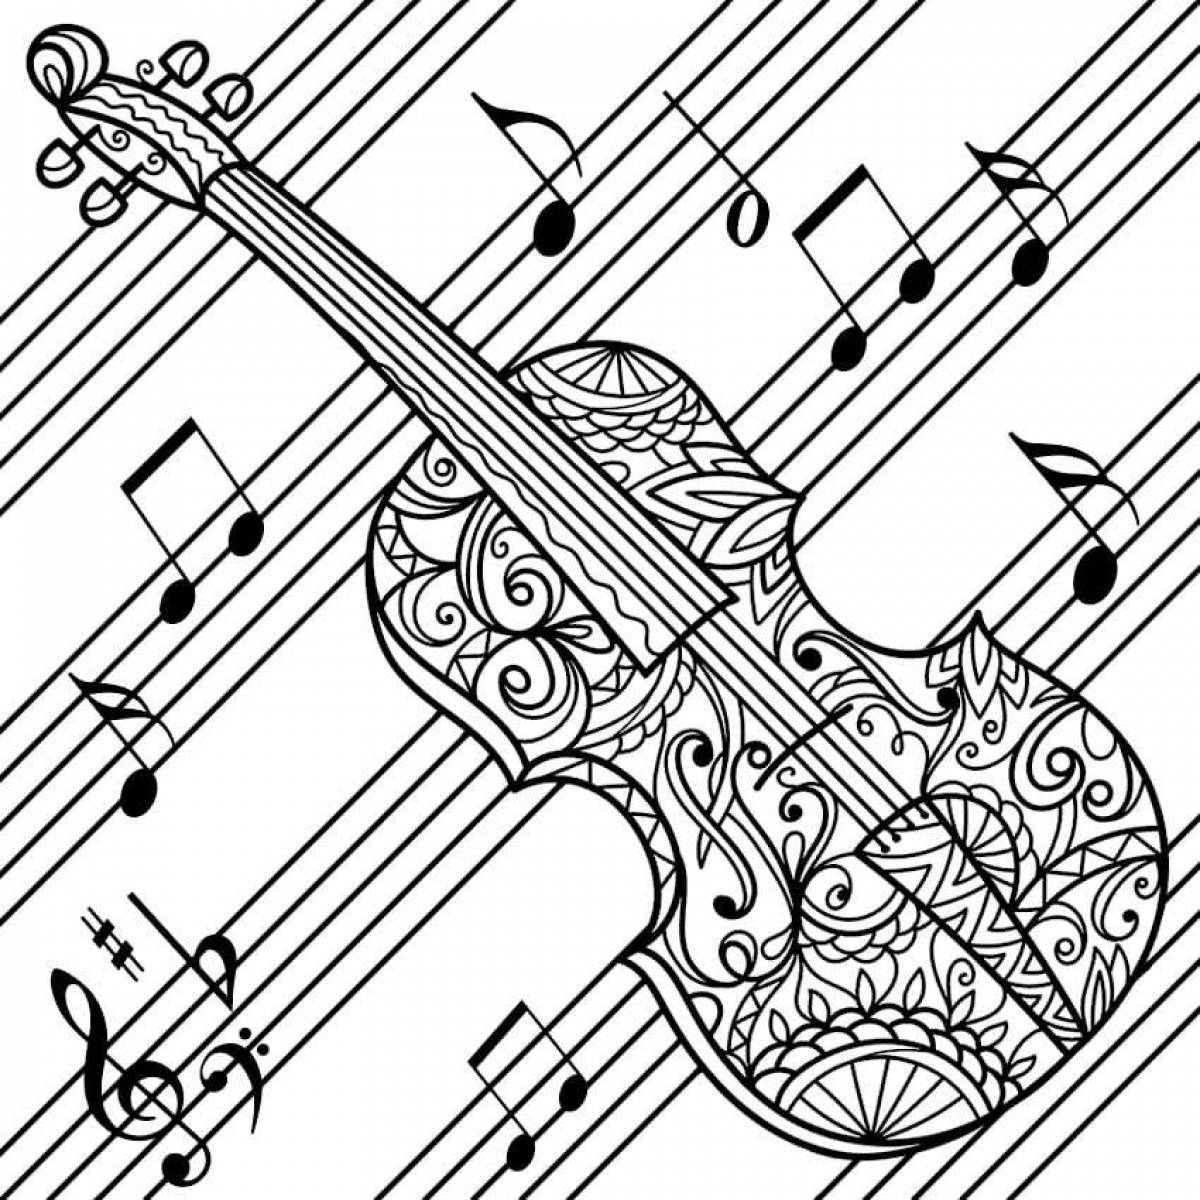 Fabulous violin coloring page